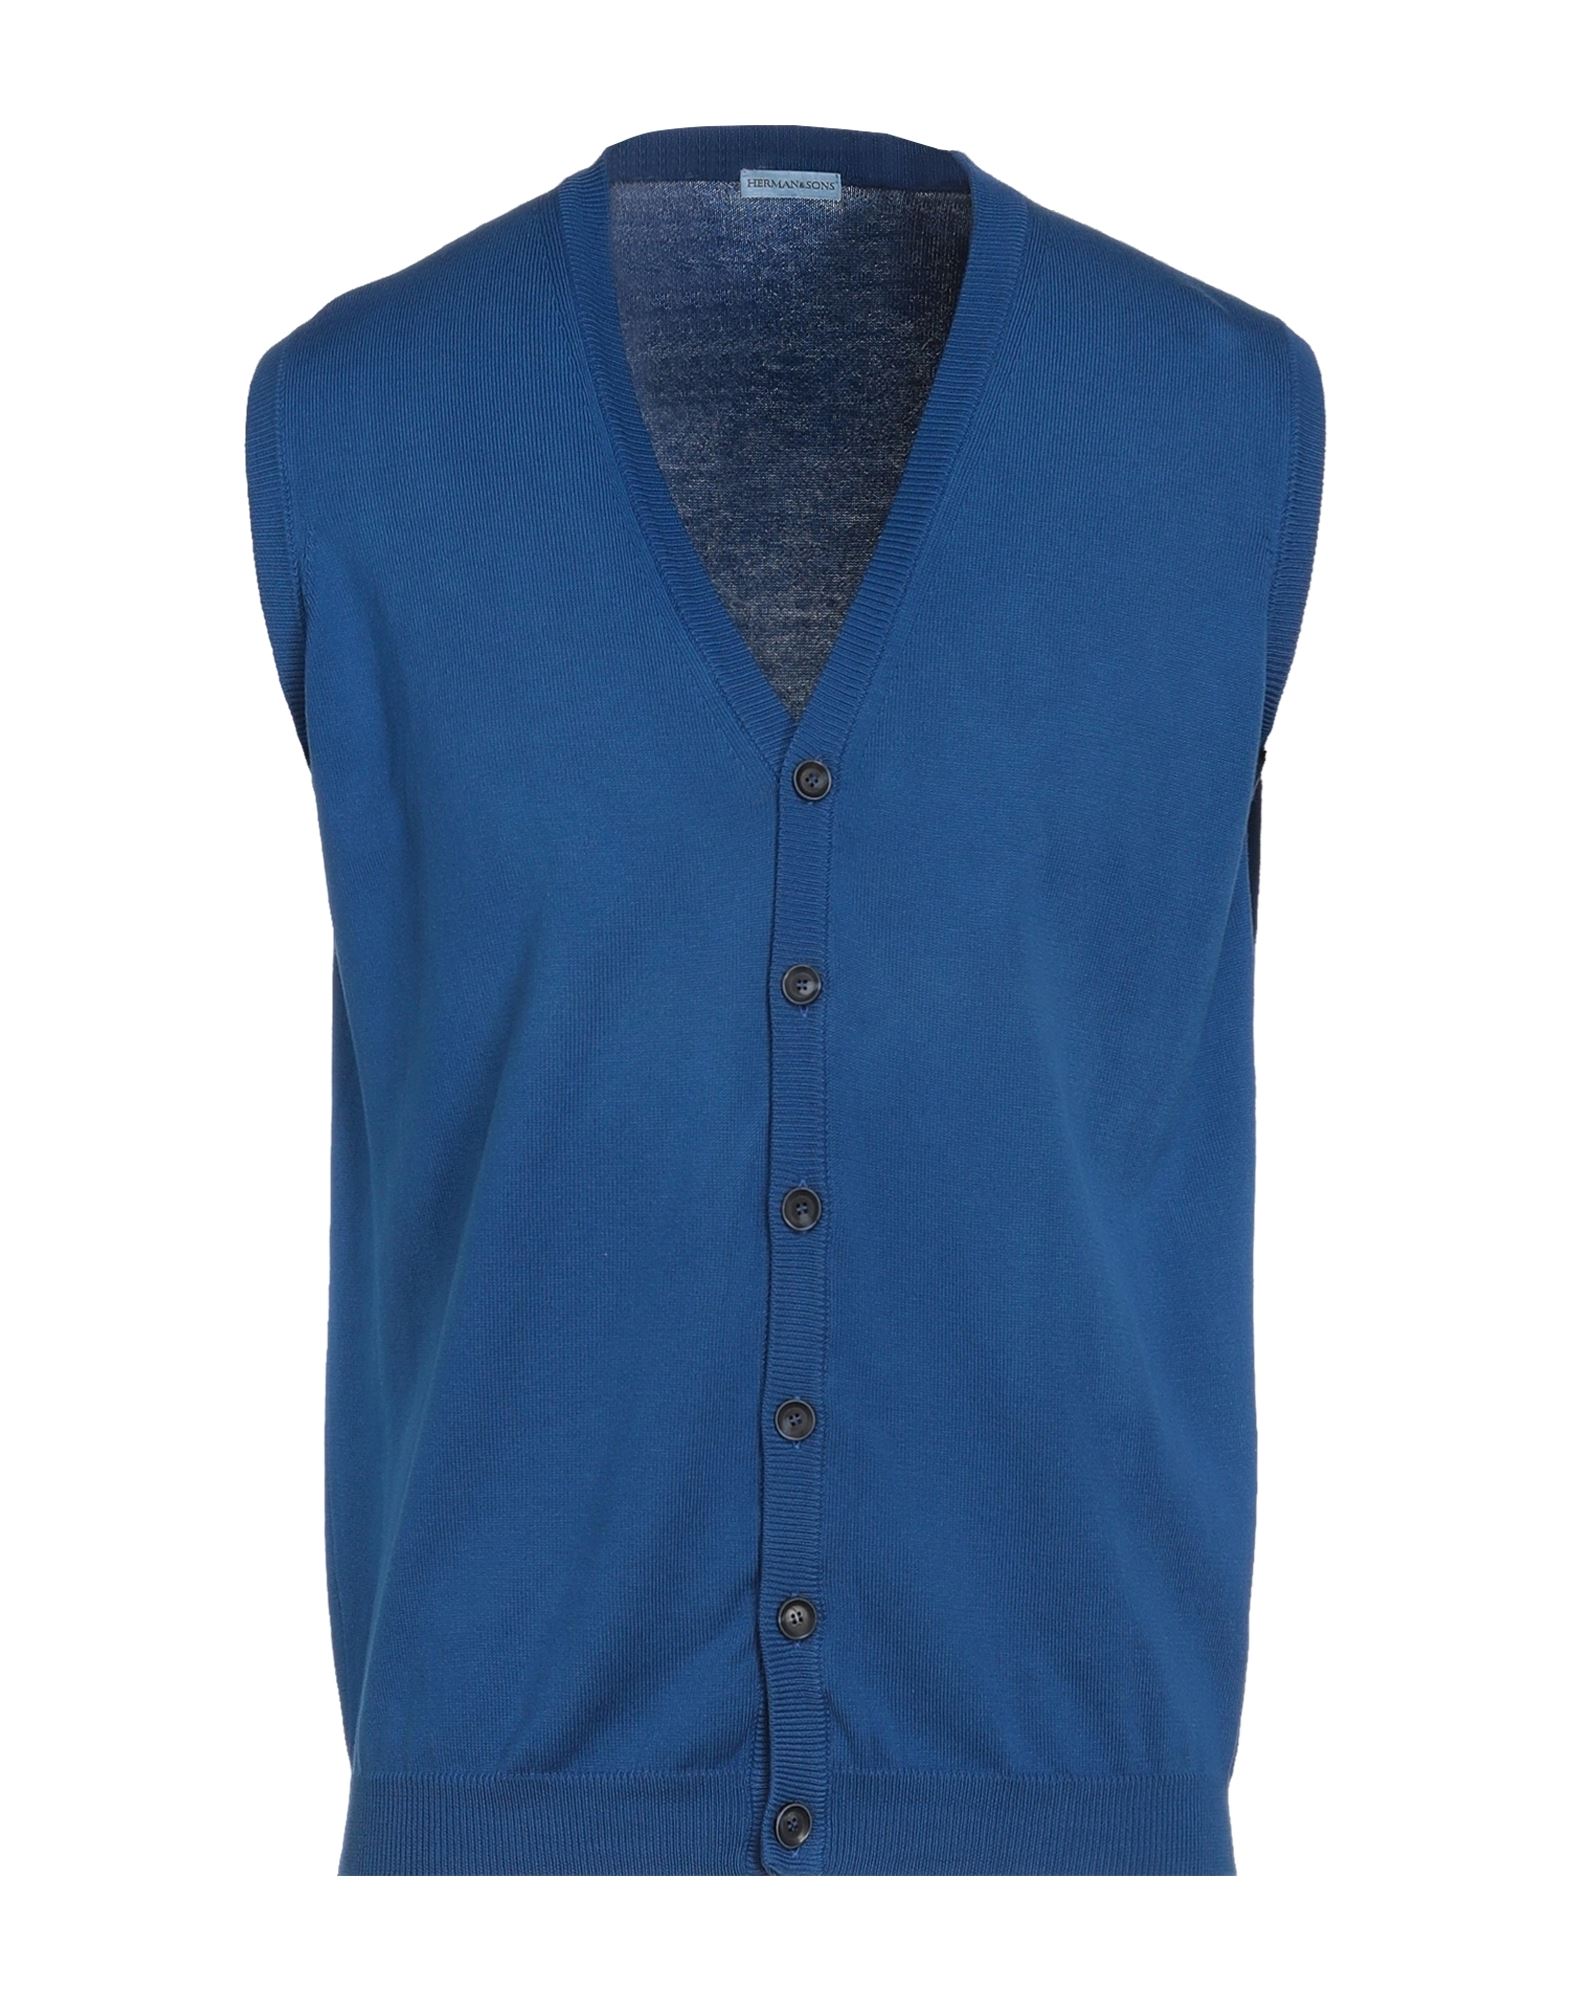 Herman & Sons Cardigans In Bright Blue